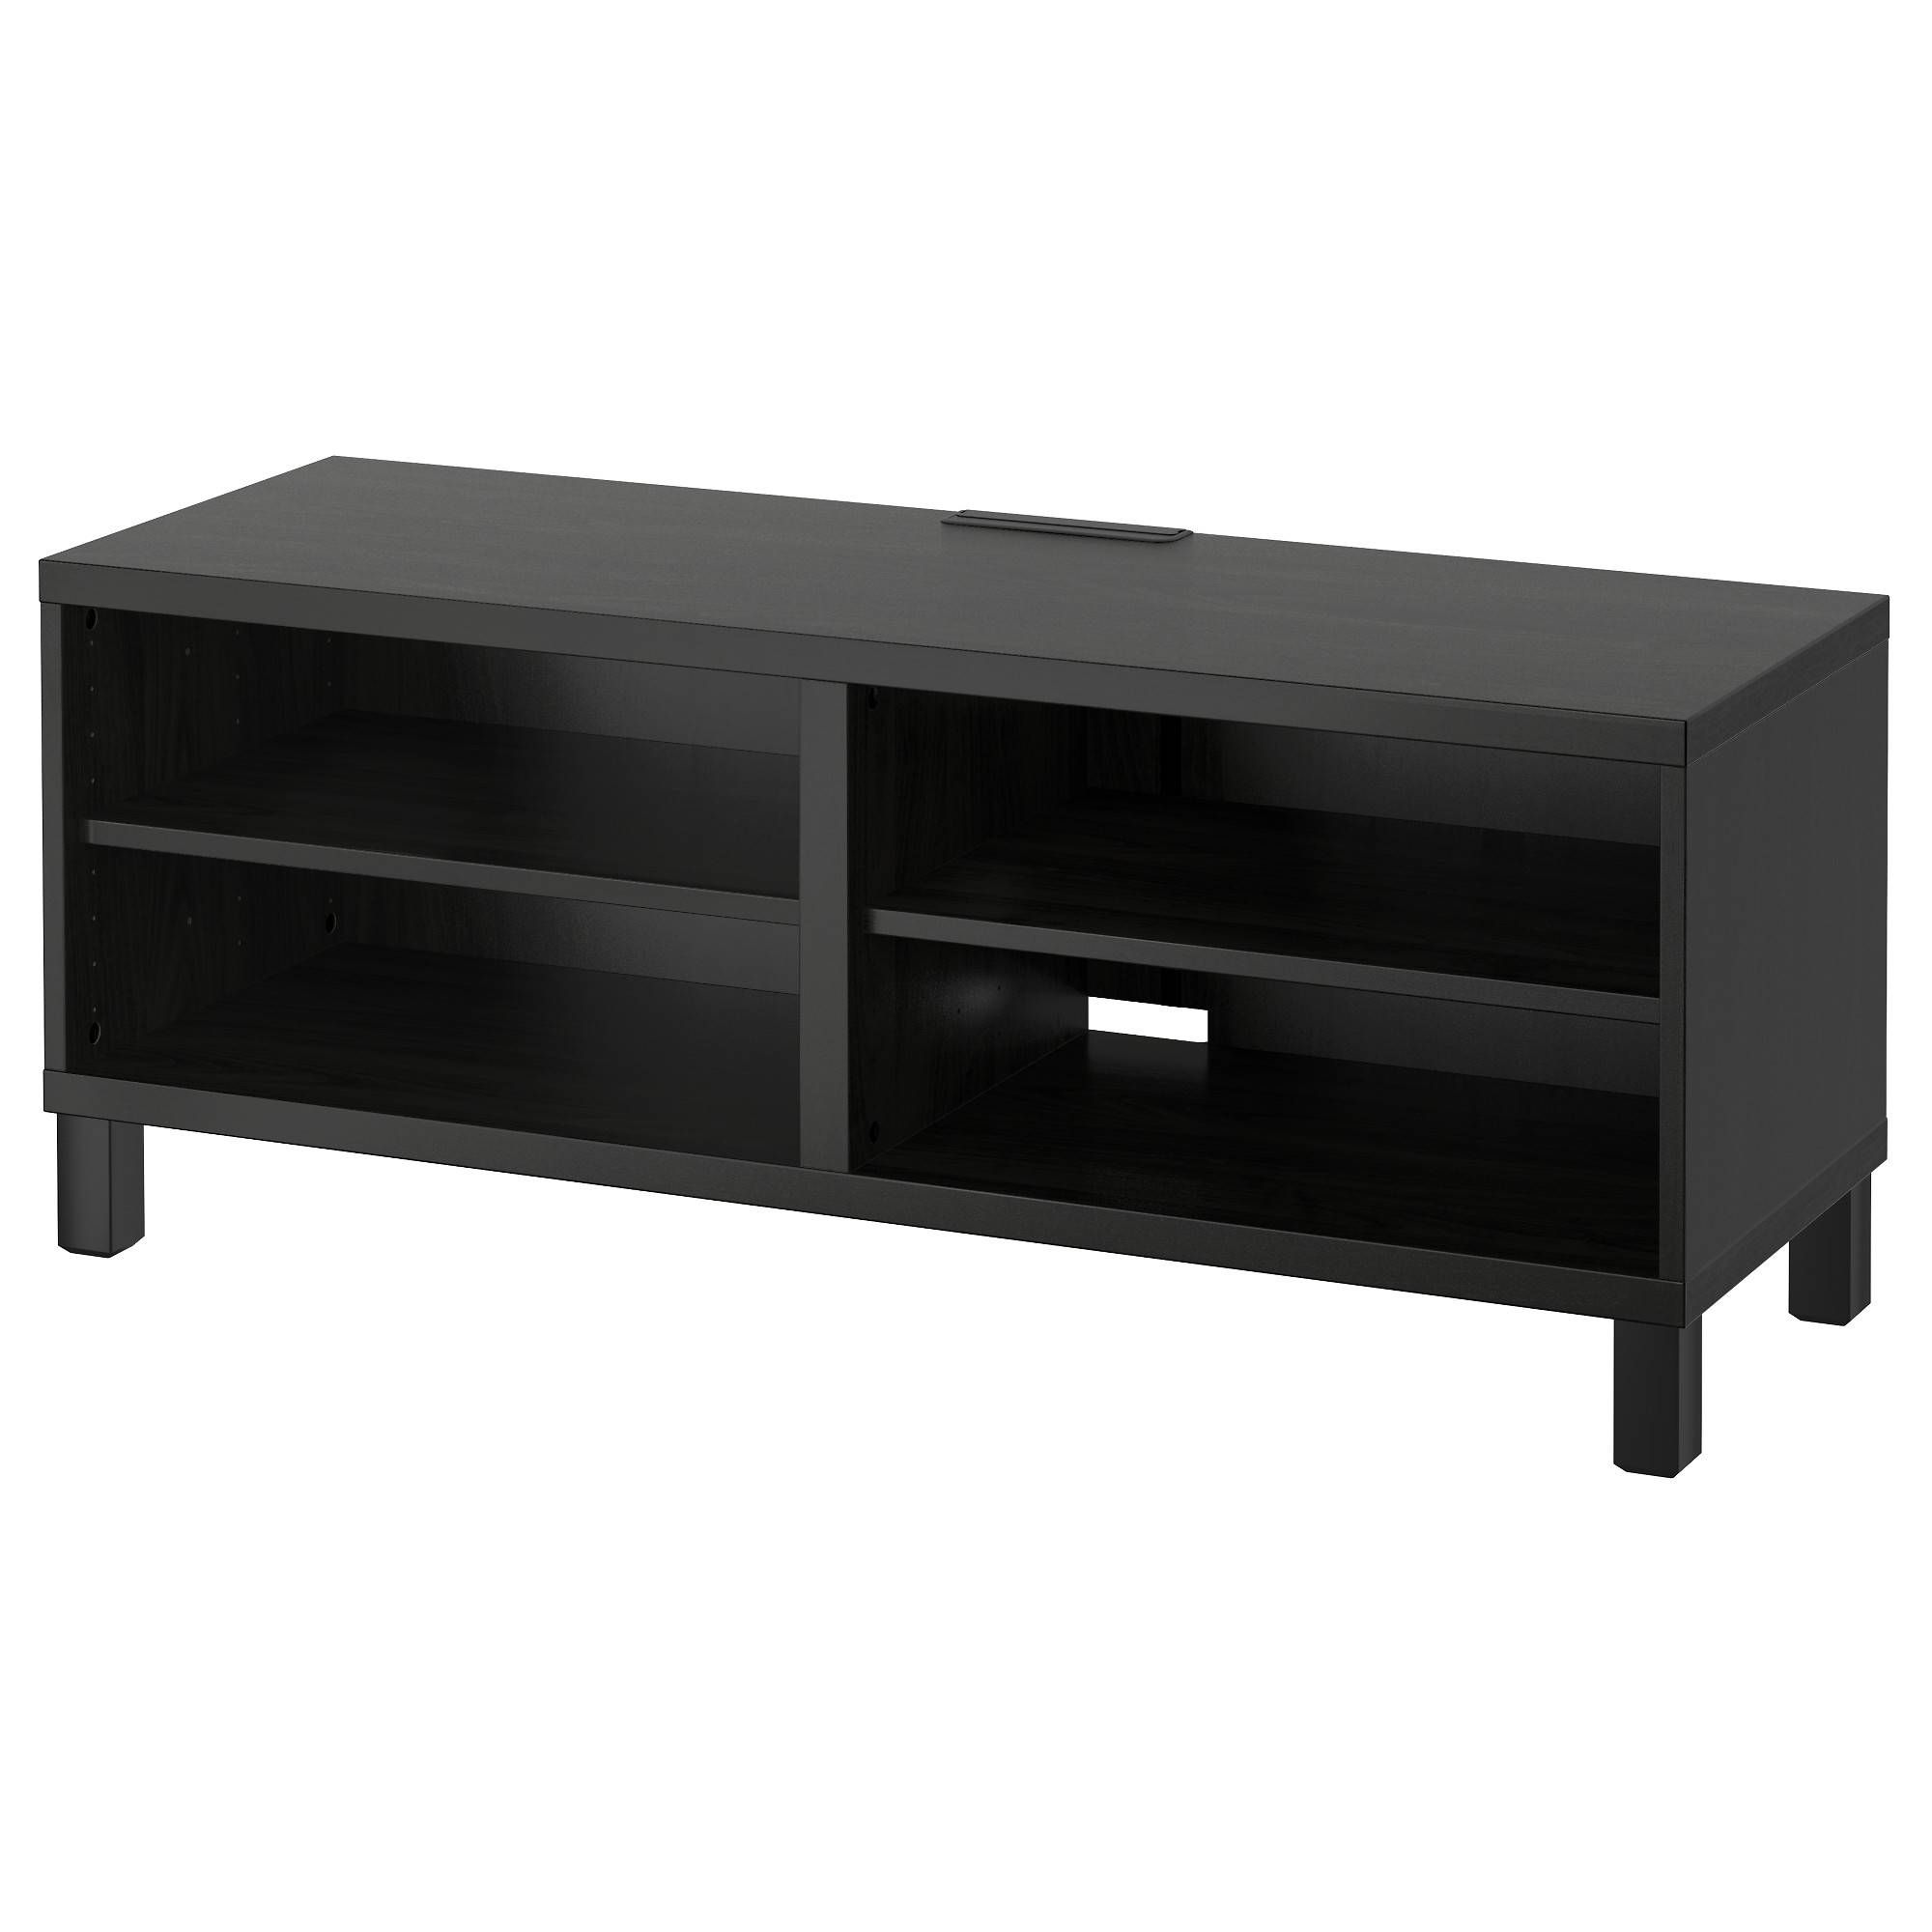 Large Tv Stands & Entertainment Centers – Ikea Inside 60 Cm High Tv Stand (Photo 9 of 15)